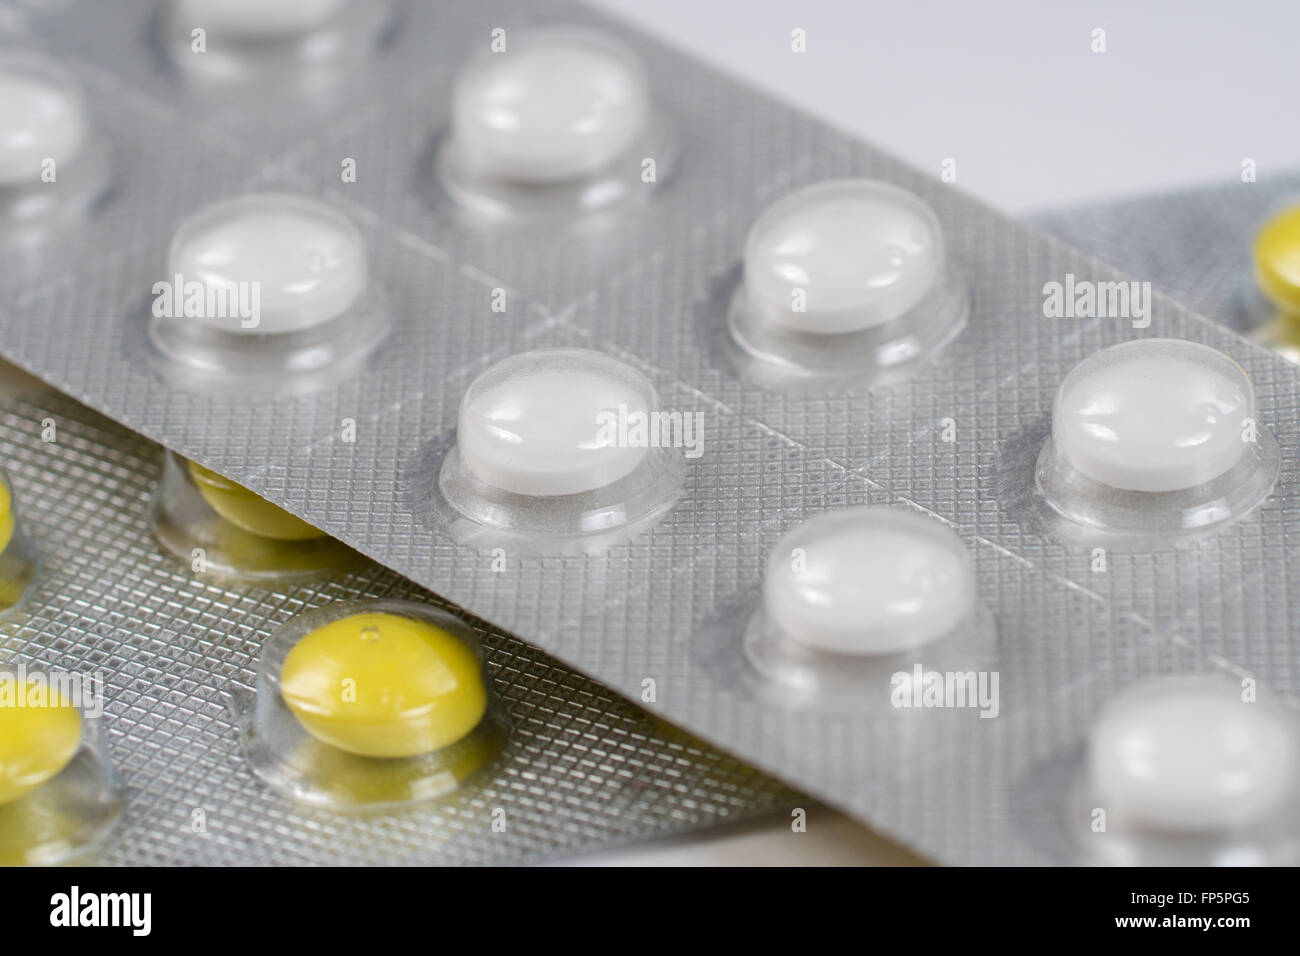 close up of white and yellow pills in blisters Stock Photo